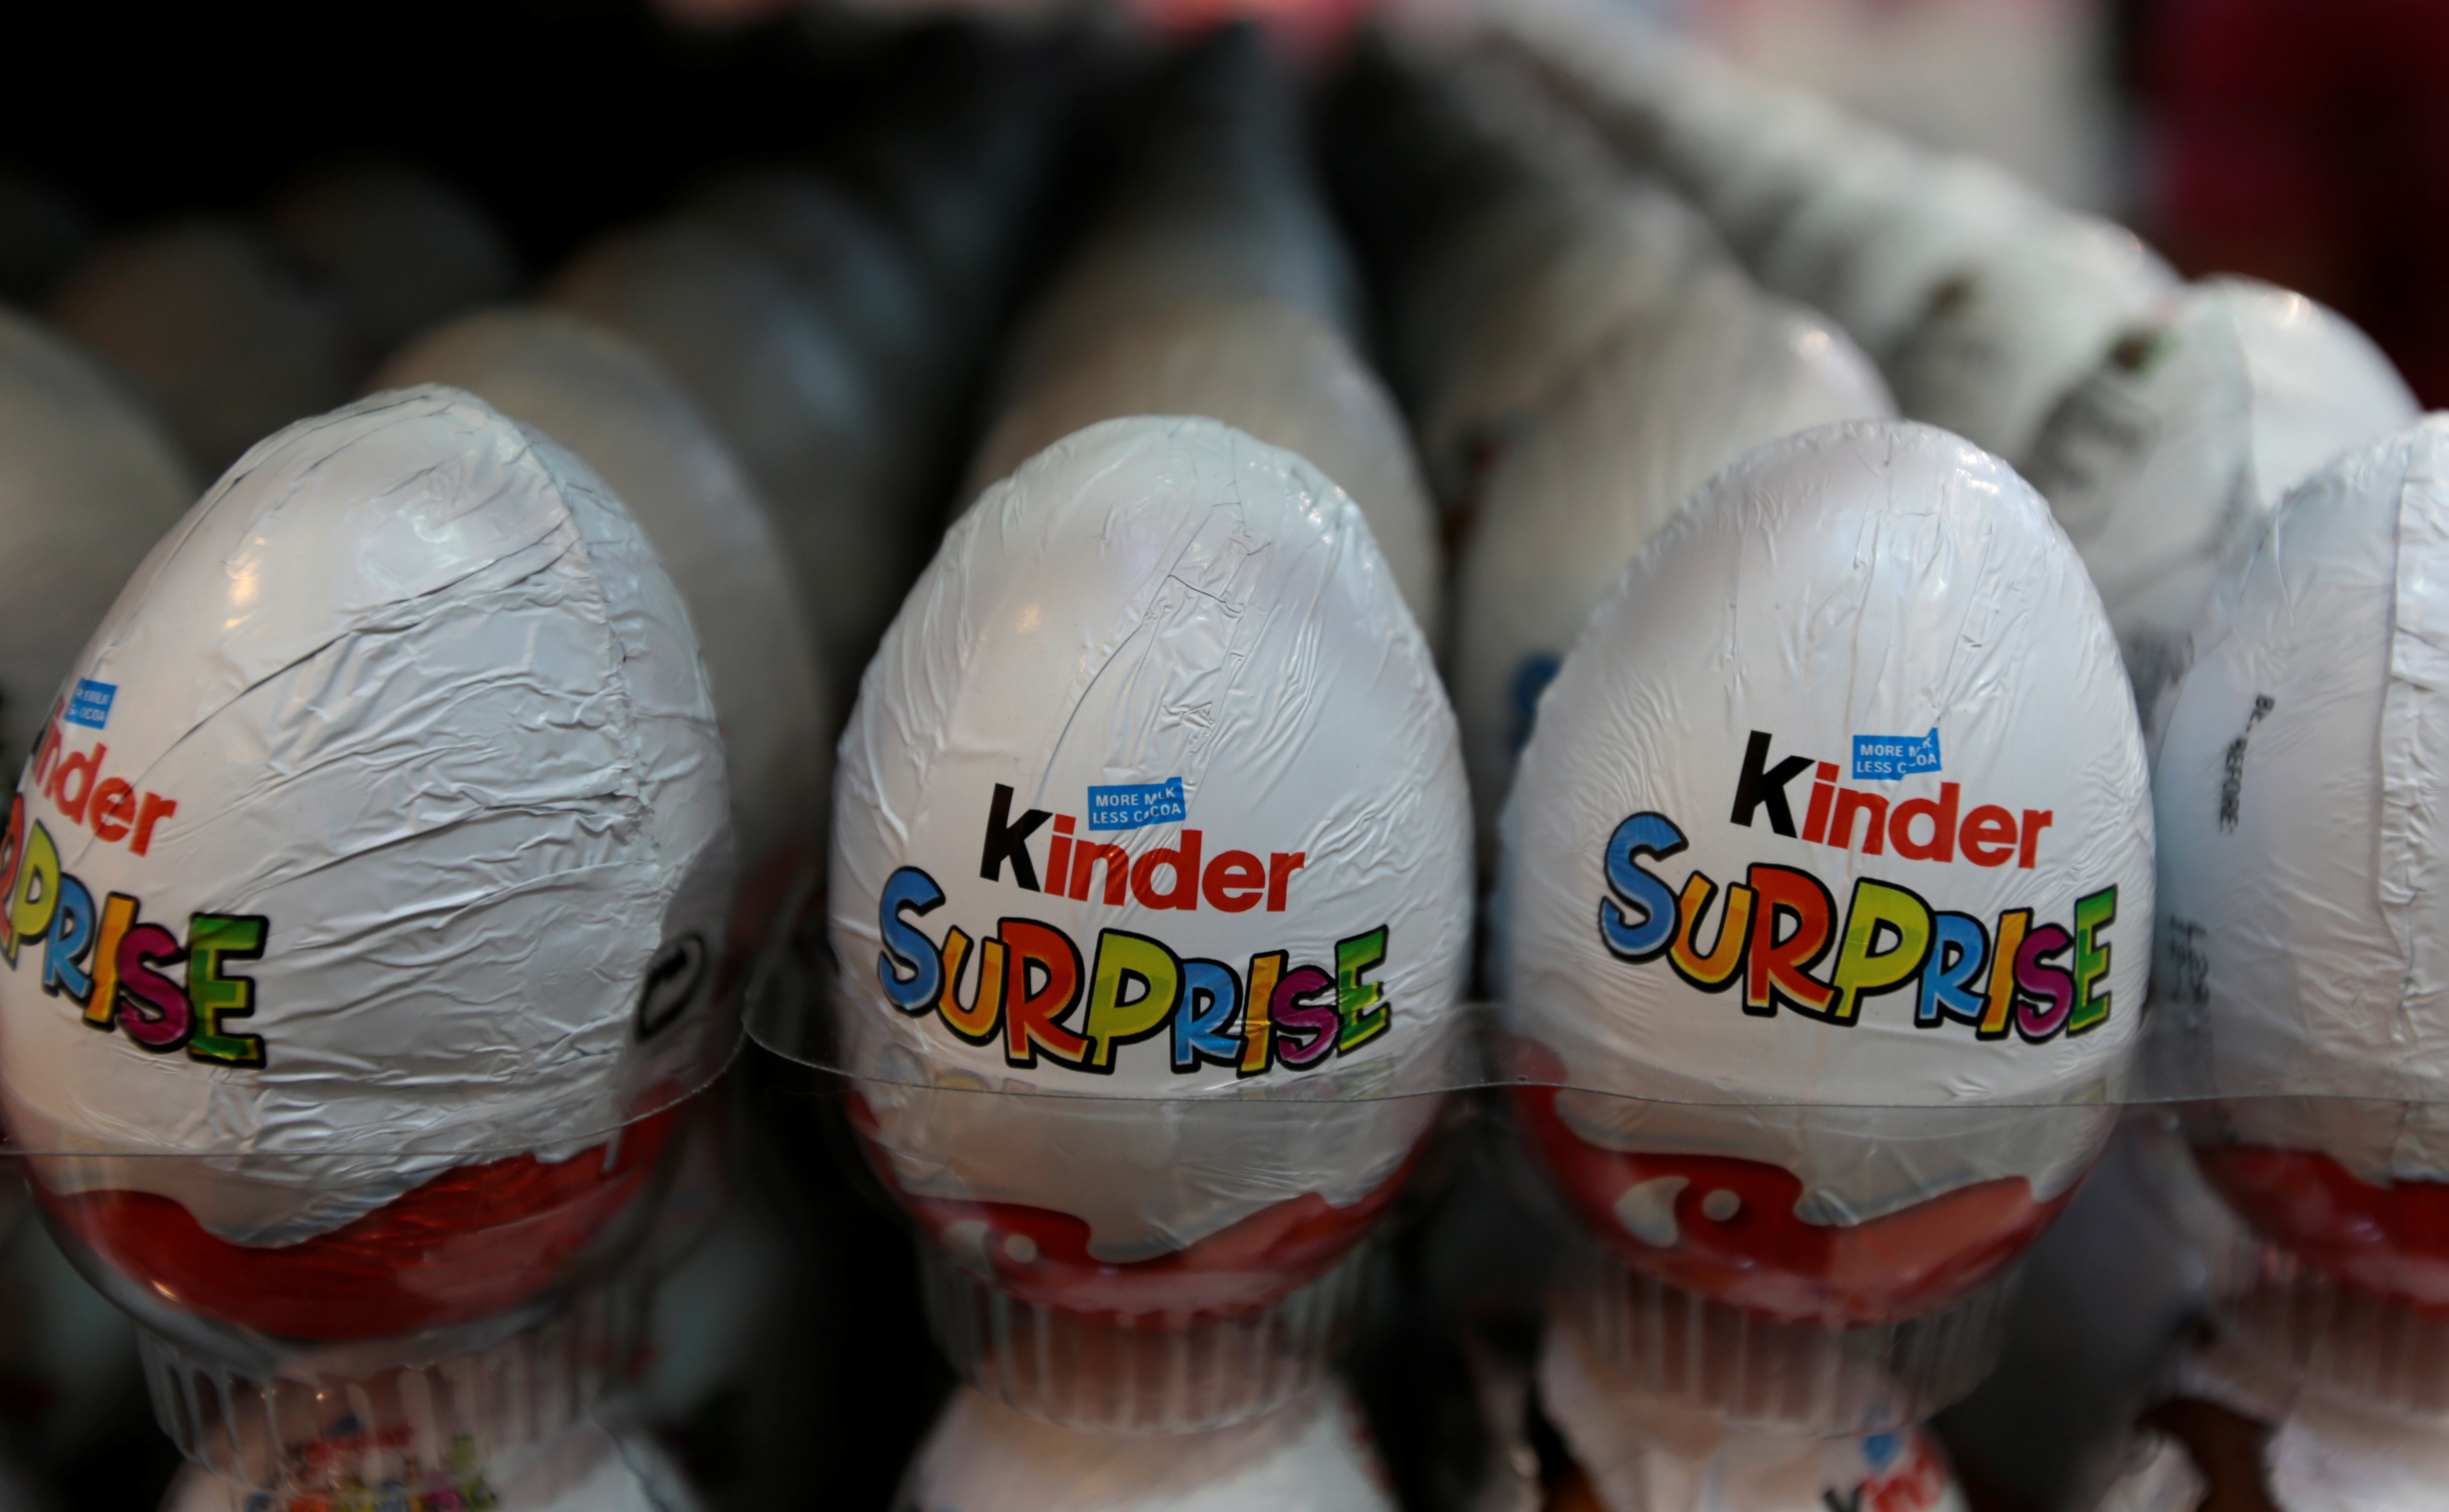 Kinder chocolate eggs are seen on display in a supermarket in Islamabad